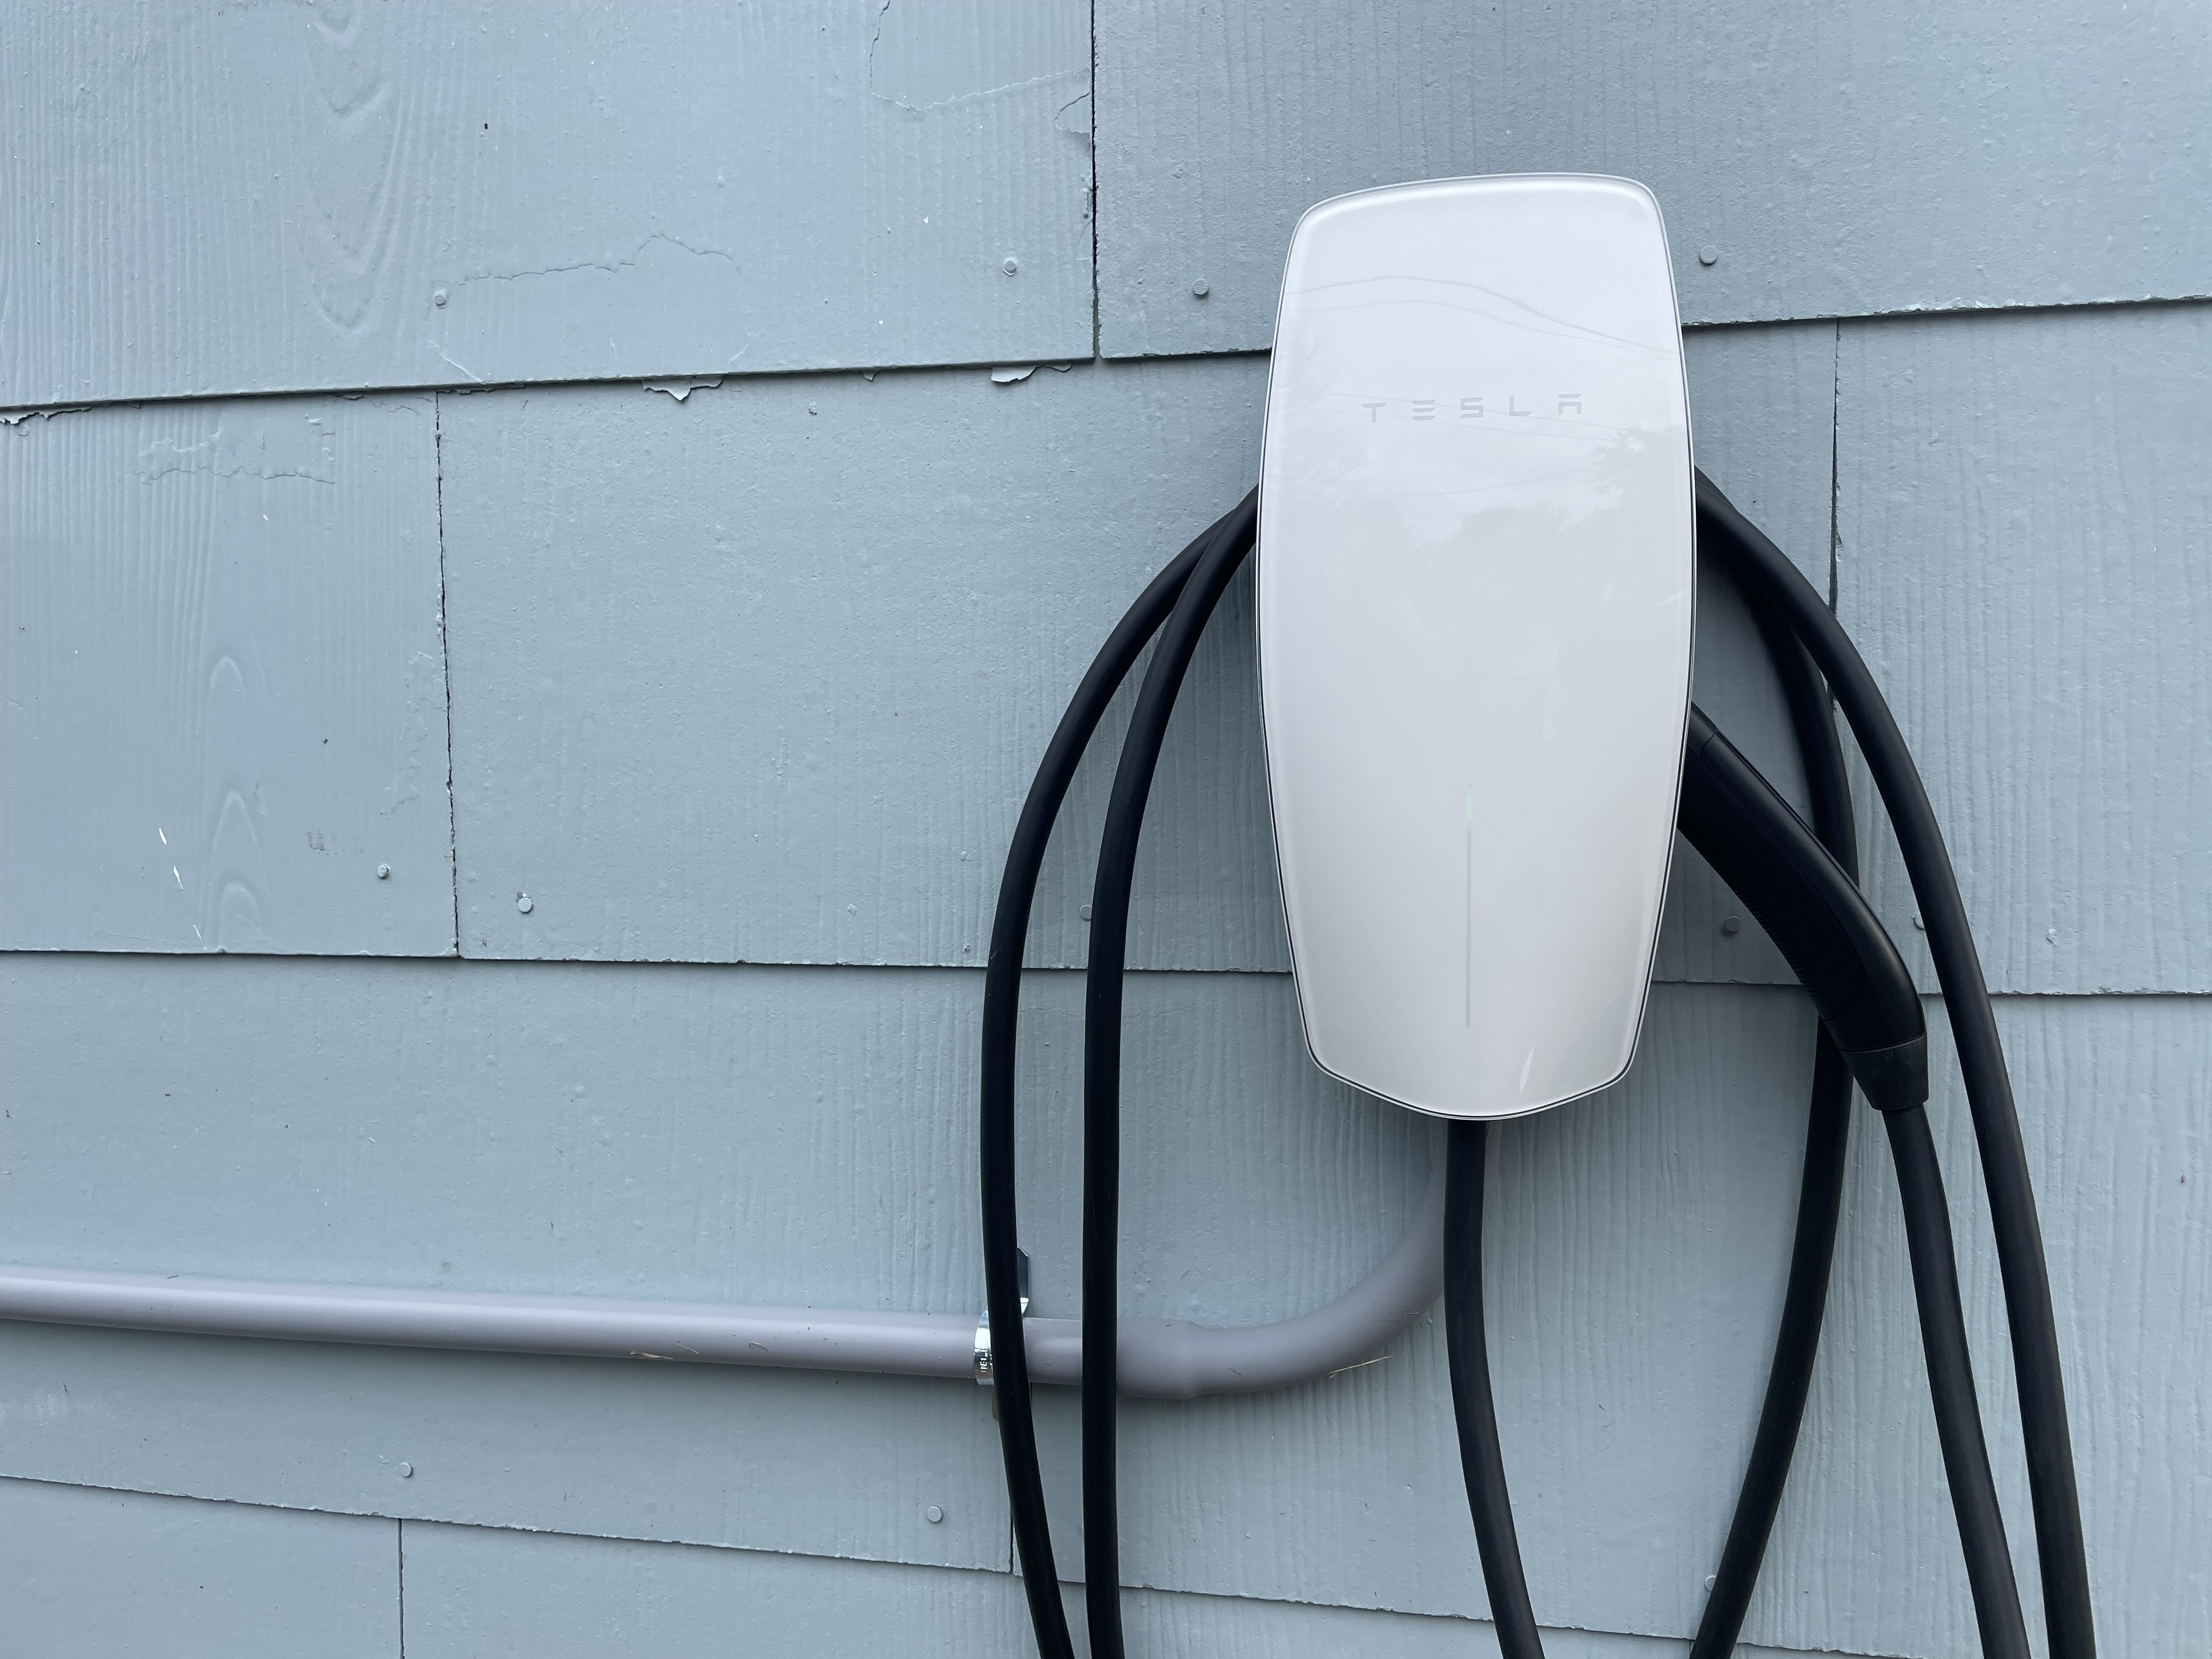 How to Install Tesla Home Charger Gen 3